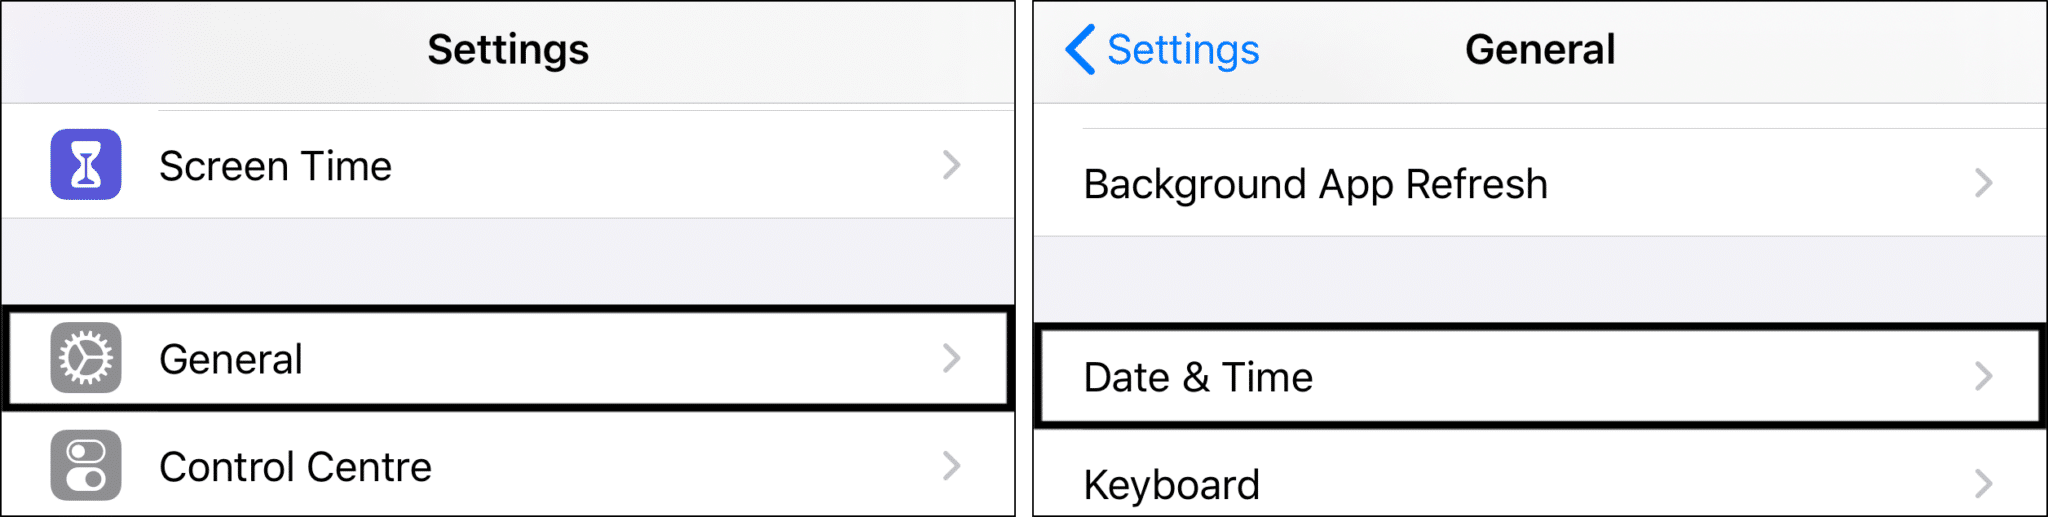 set date and time settings automatically on iPhone to fix Instagram feed, homepage or Explore page not refreshing, updating, loading or "Couldn't Refresh Feed"